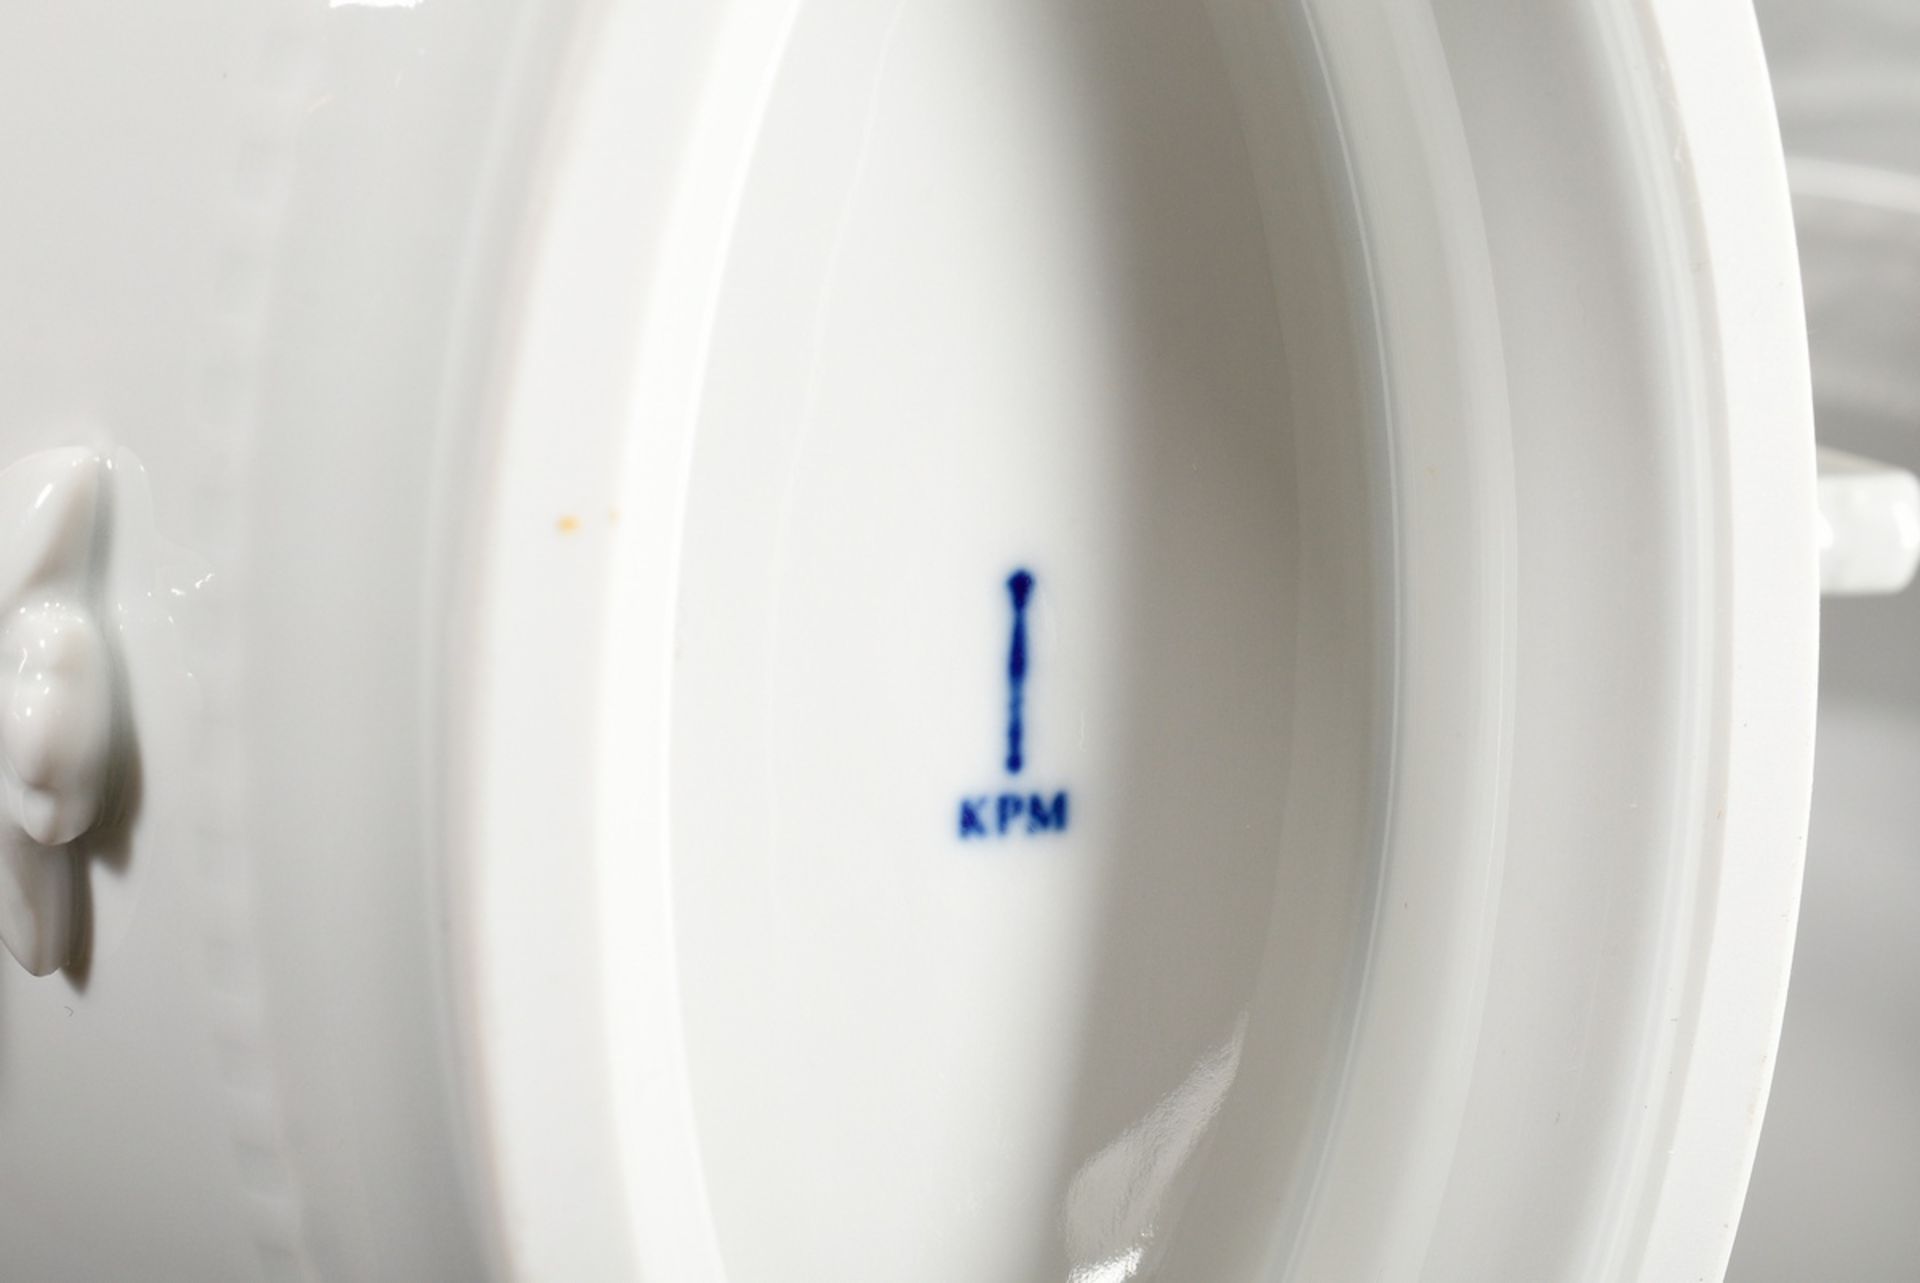 53 Pieces KPM dinner service "Kurland white" with relief border, consisting of: 14 dinner plates (Ø - Image 6 of 6